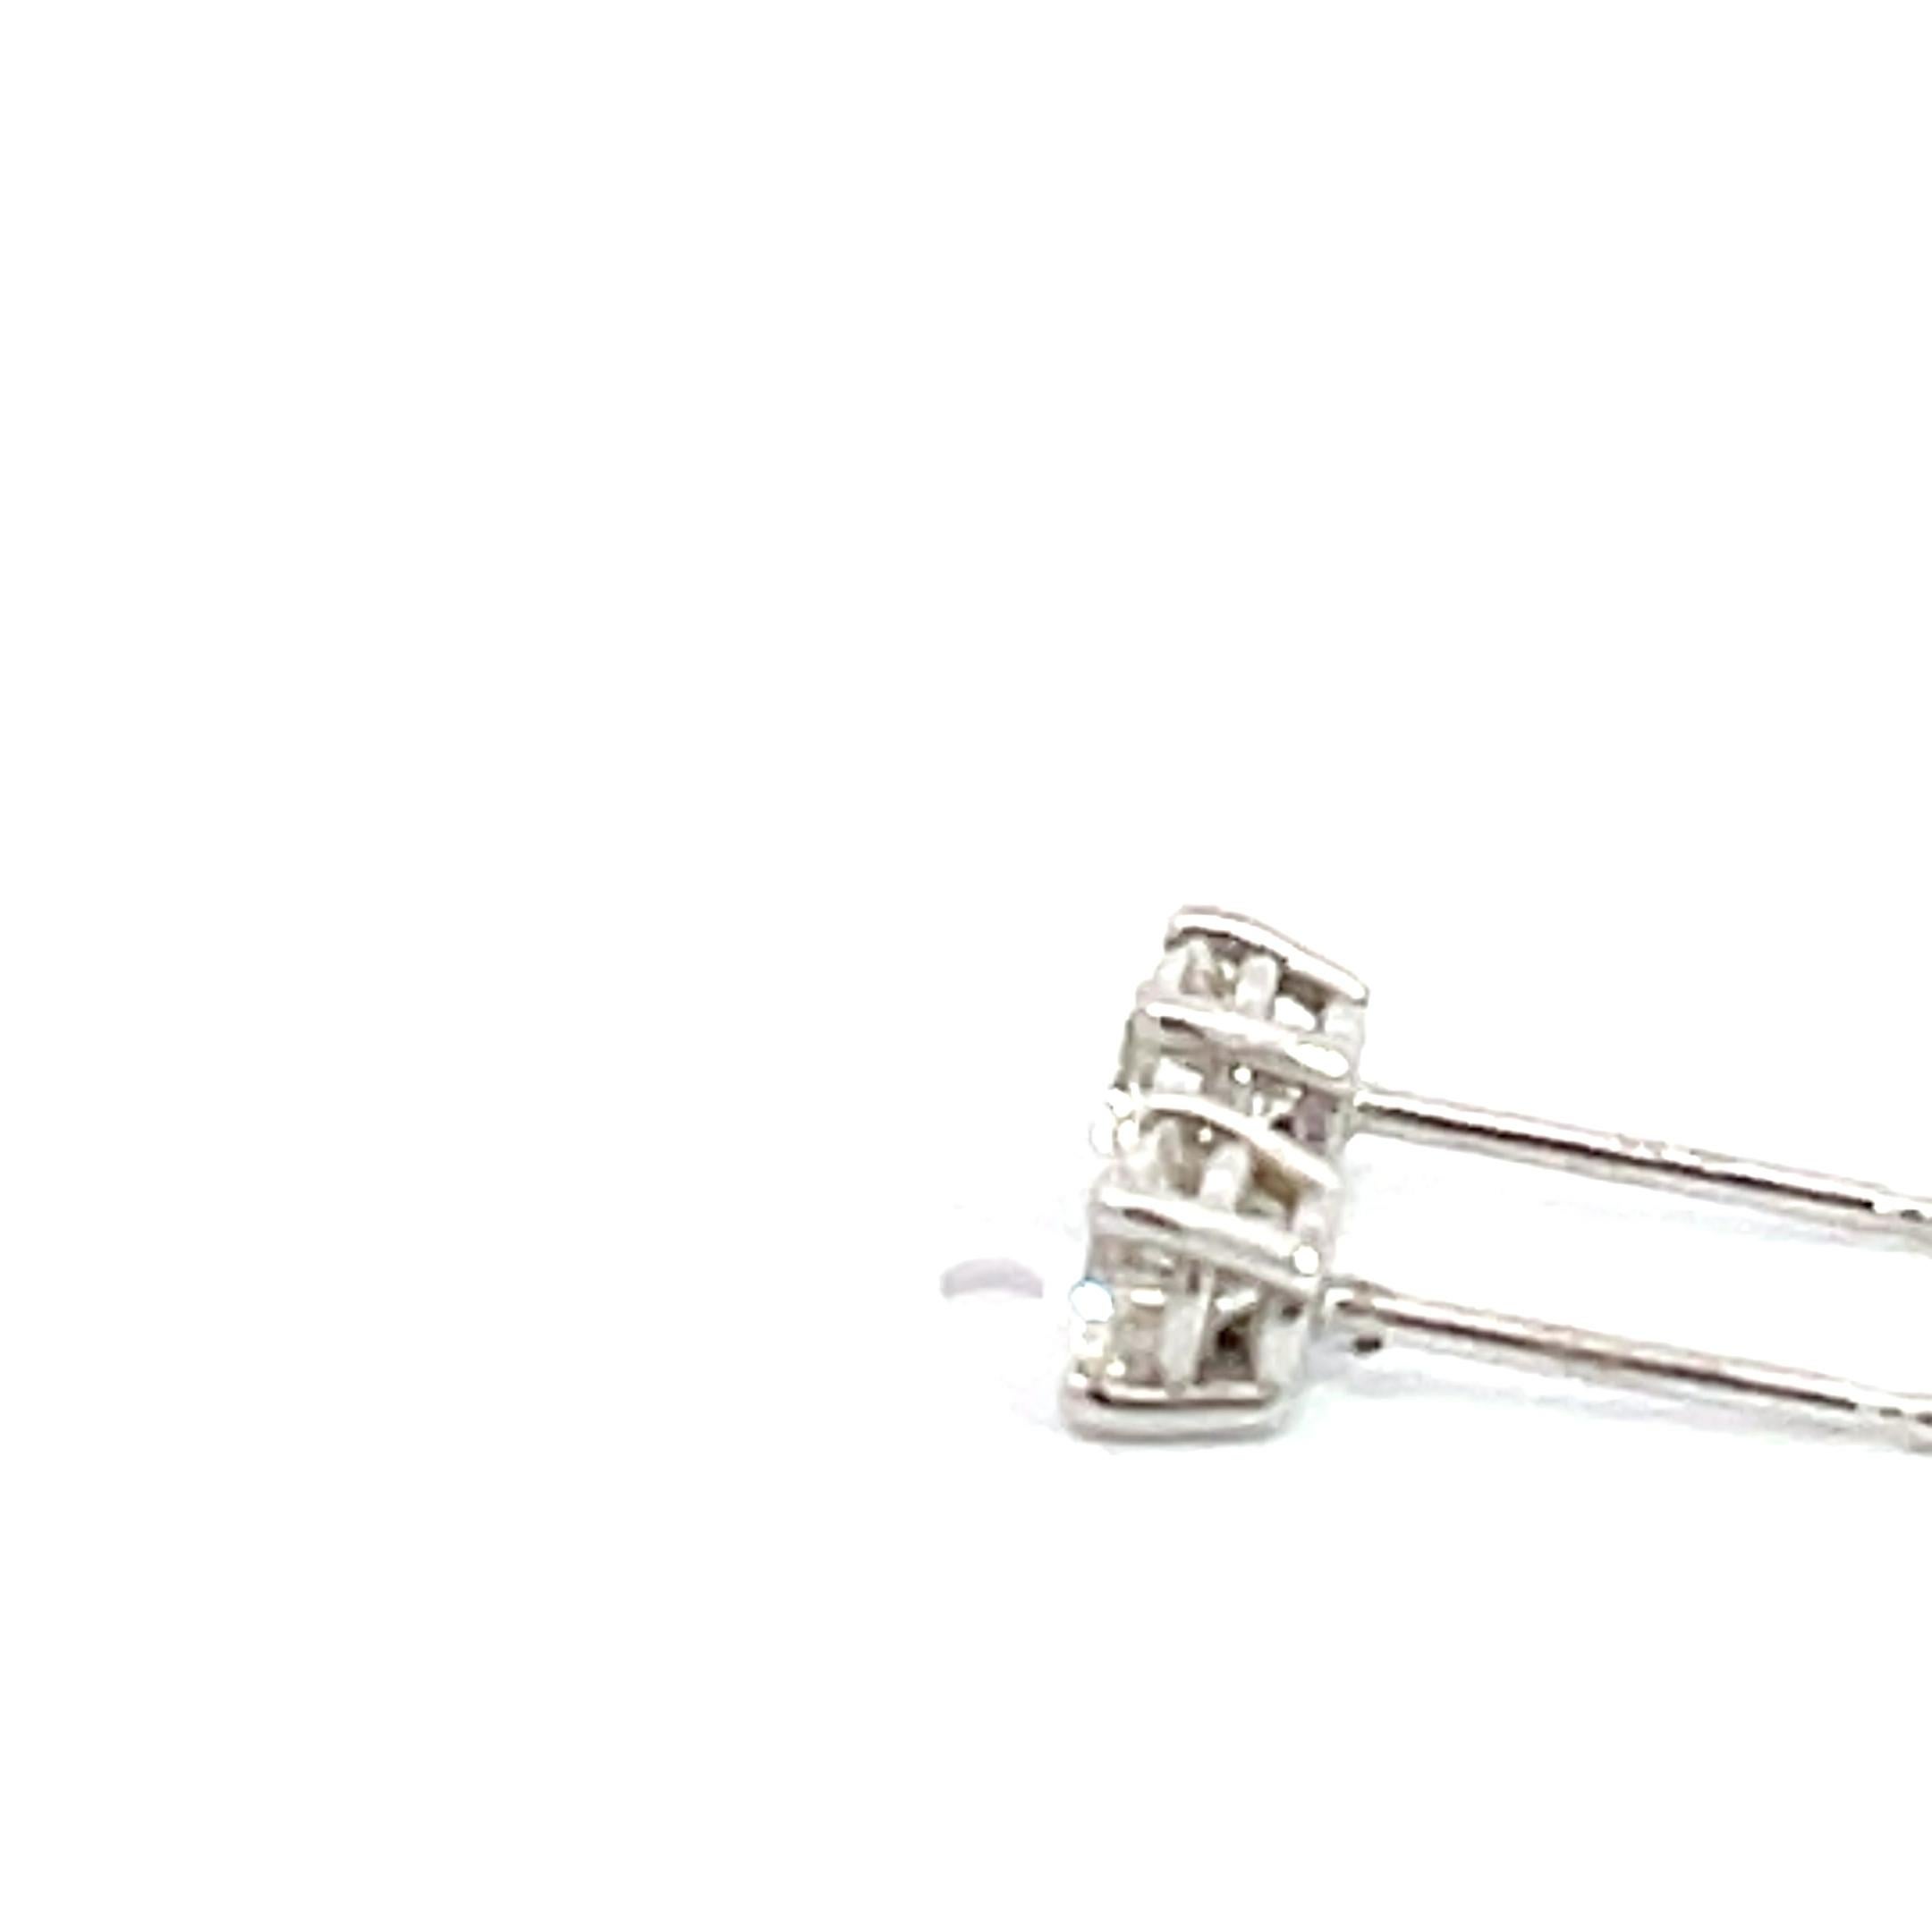 The 14K White Gold 0.50 carat Diamond 4 prong studs are a dazzling pair of earrings that exude elegance and sophistication. Crafted from high-quality 14K white gold, these studs showcase a timeless design that will never go out of style. The 0.50